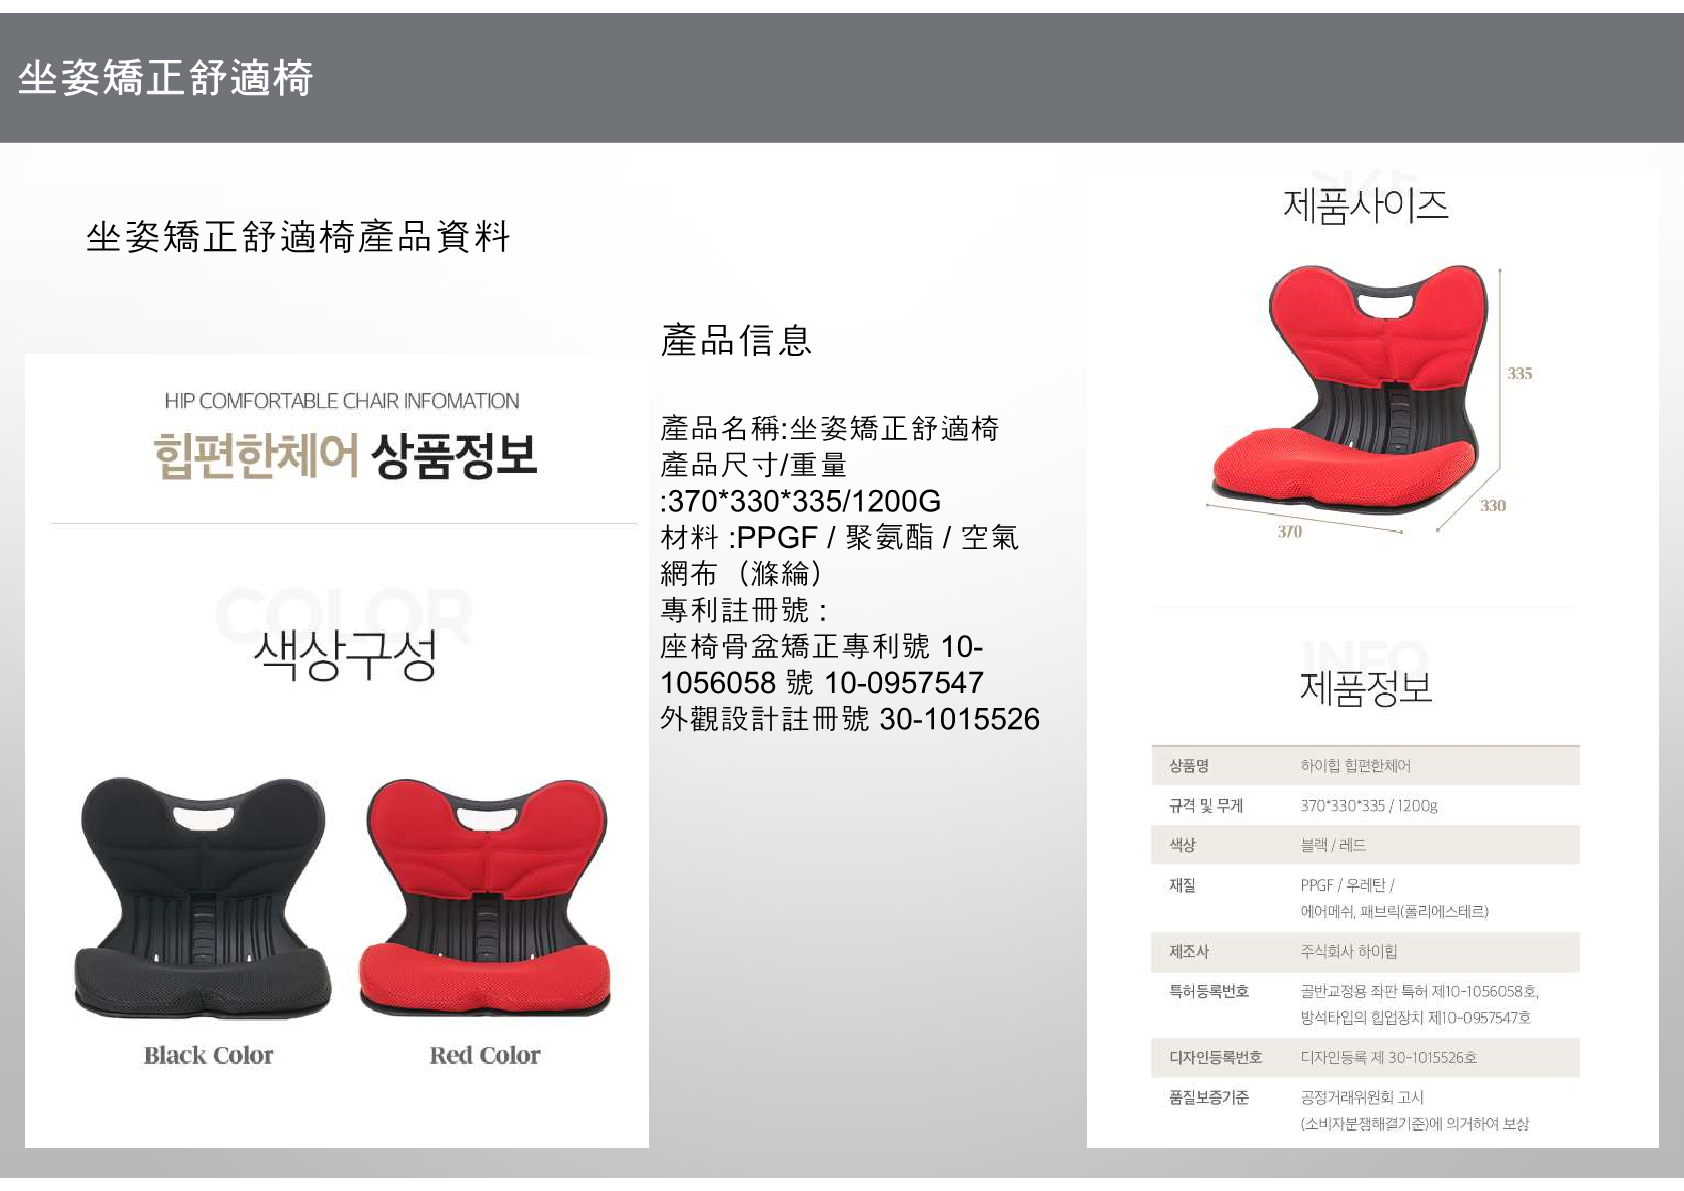 hi-hip-custion-chair-product-introduction13.png